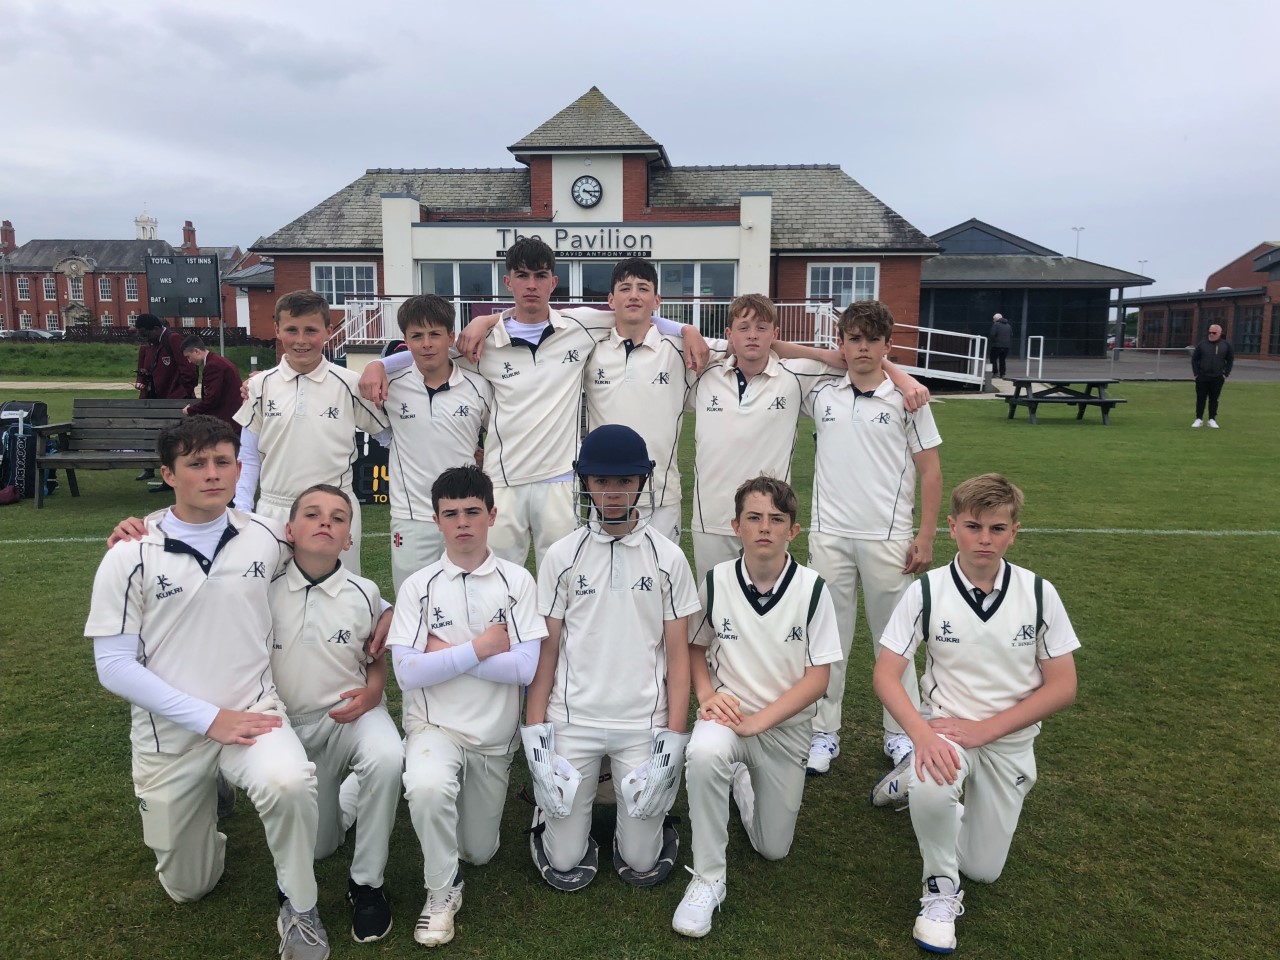 Cricket results for w/c 16th May by Mr Castellas